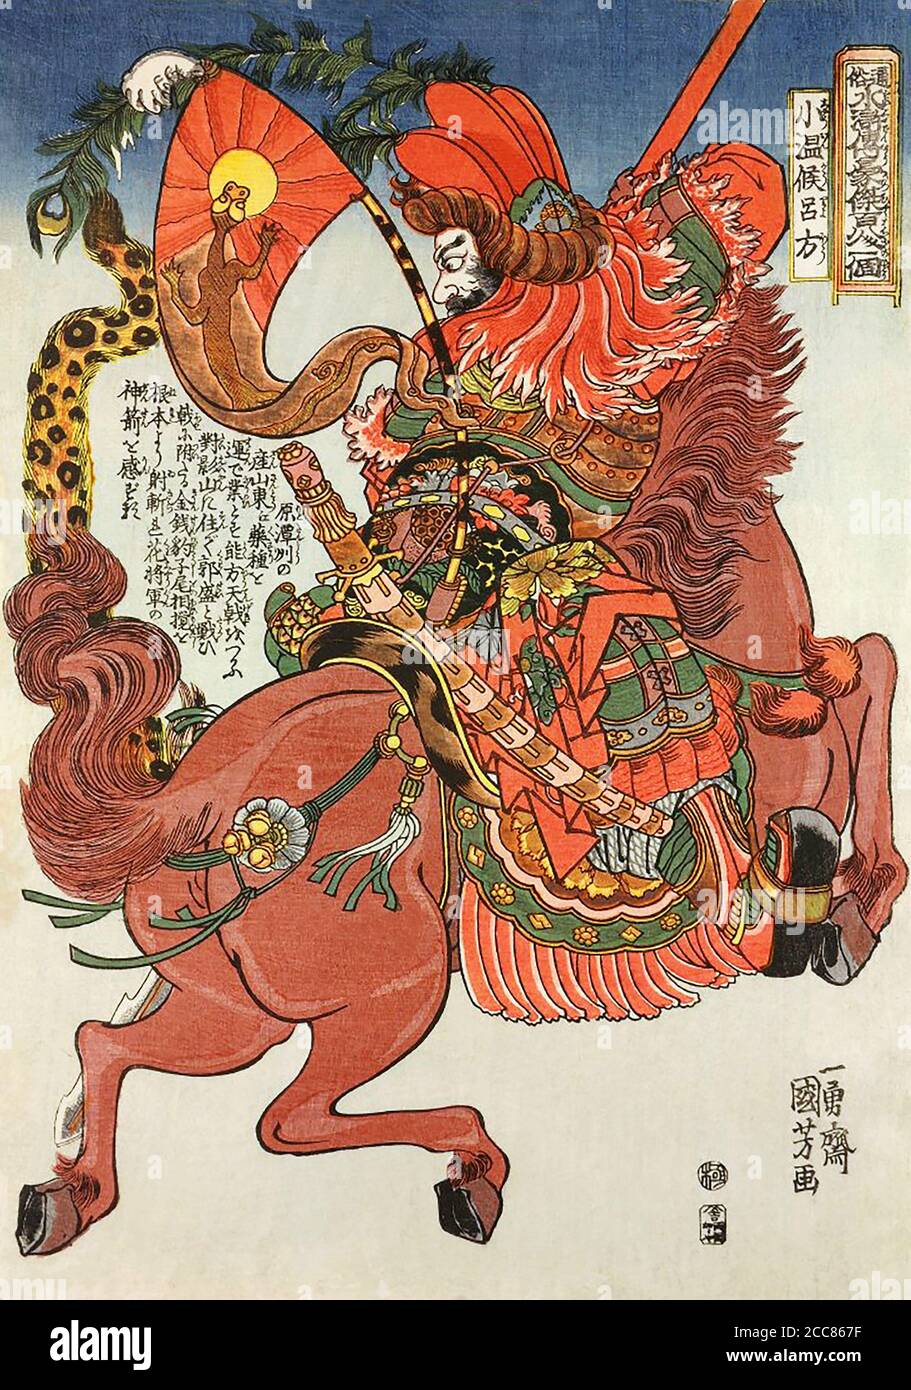 Japan: Lu Fang or Sho'onko Ryoho, one of the 'One Hundred and Eight Heroes of the Water Margin', viewed three quarters from the back of a galloping horse and armed with a long spear, his banner showing a newt. Woodblock print by Utagawa Kuniyoshi (1797-1863), 1827-1830. The Water Margin (known in Chinese as Shuihu Zhuan, sometimes abbreviated to Shuihu, known as Suikoden in Japanese, as well as Outlaws of the Marsh, Tale of the Marshes, All Men Are Brothers, Men of the Marshes, or The Marshes of Mount Liang in English, is a 14th century novel and one of the Four Great Classical Novels of Chine Stock Photo